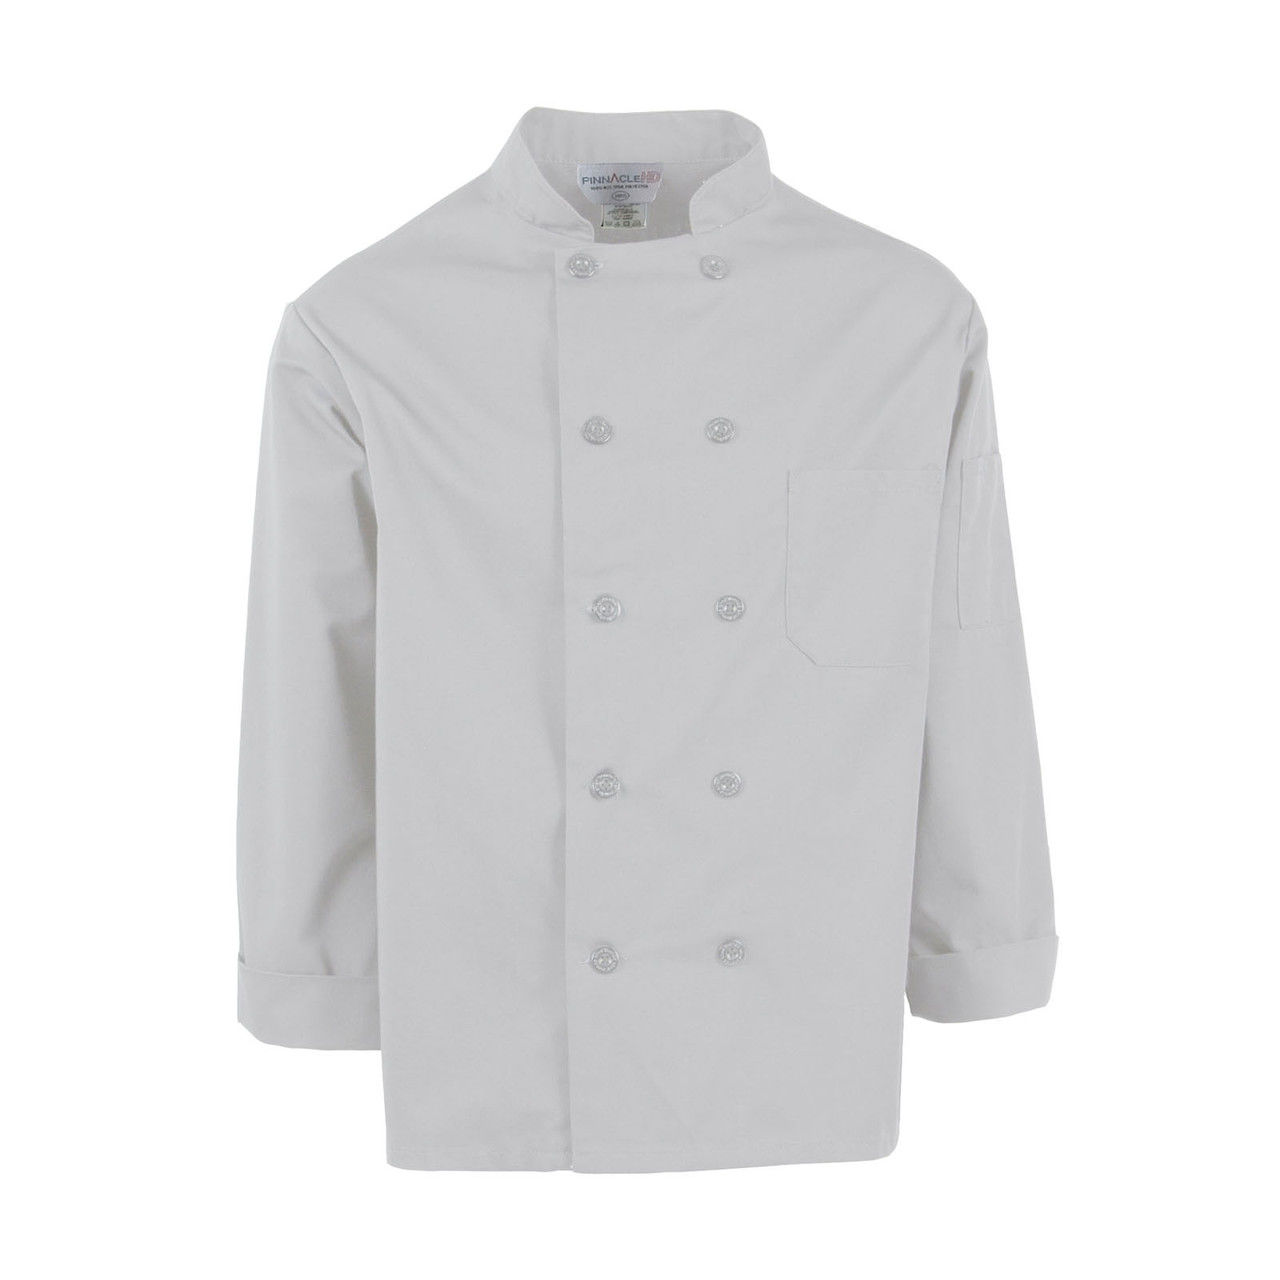 Before buying, what's the sleeve length of the white chef coat?